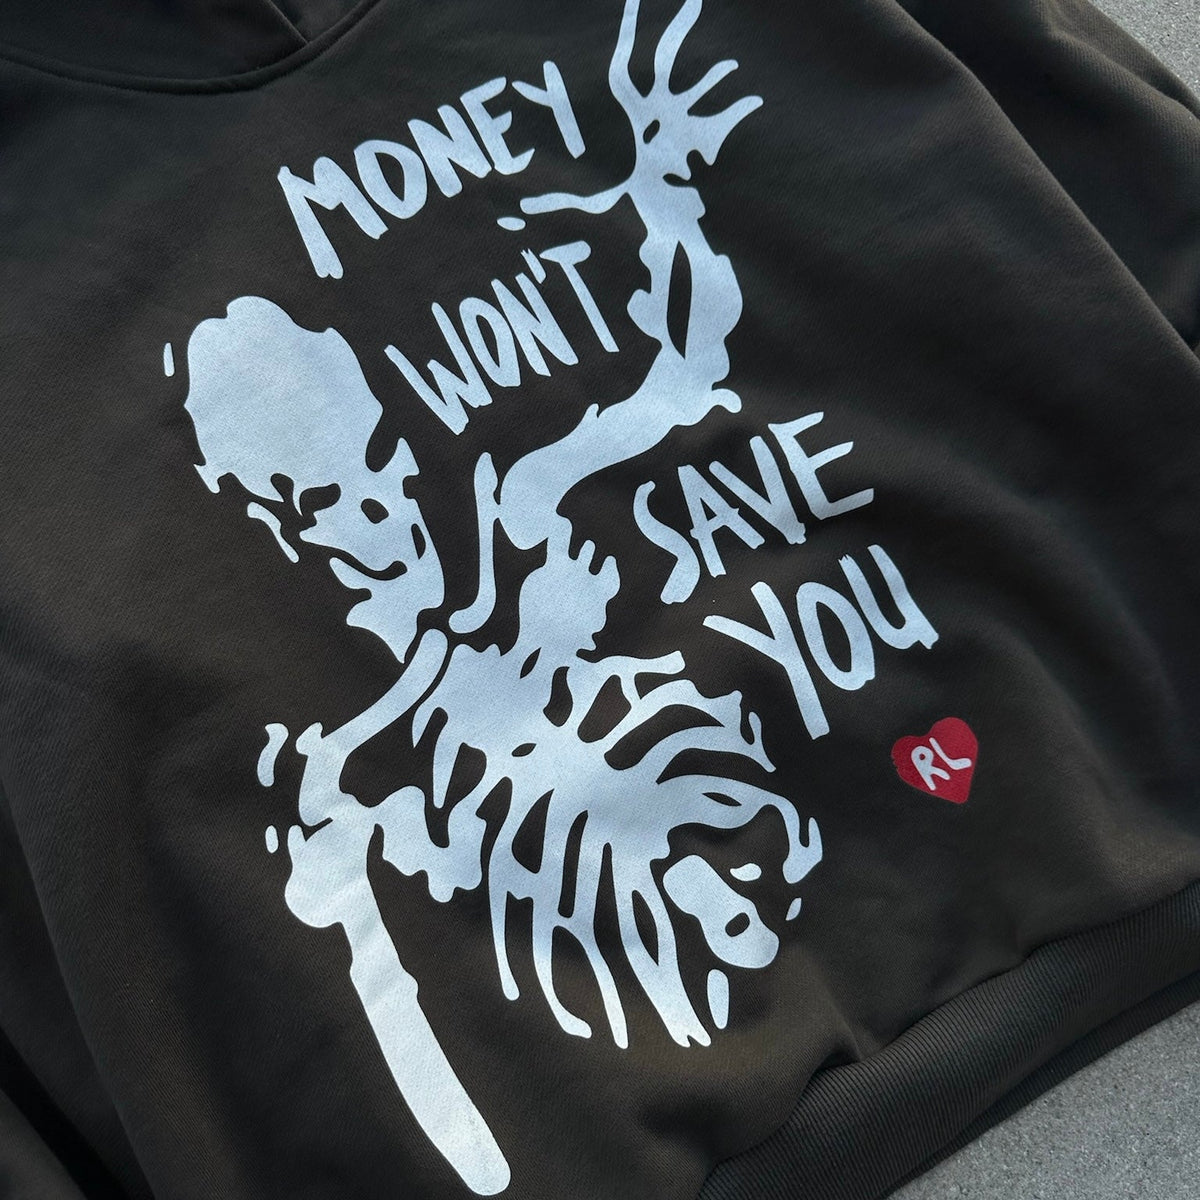 Save Money Hoodie - RED LETTERS